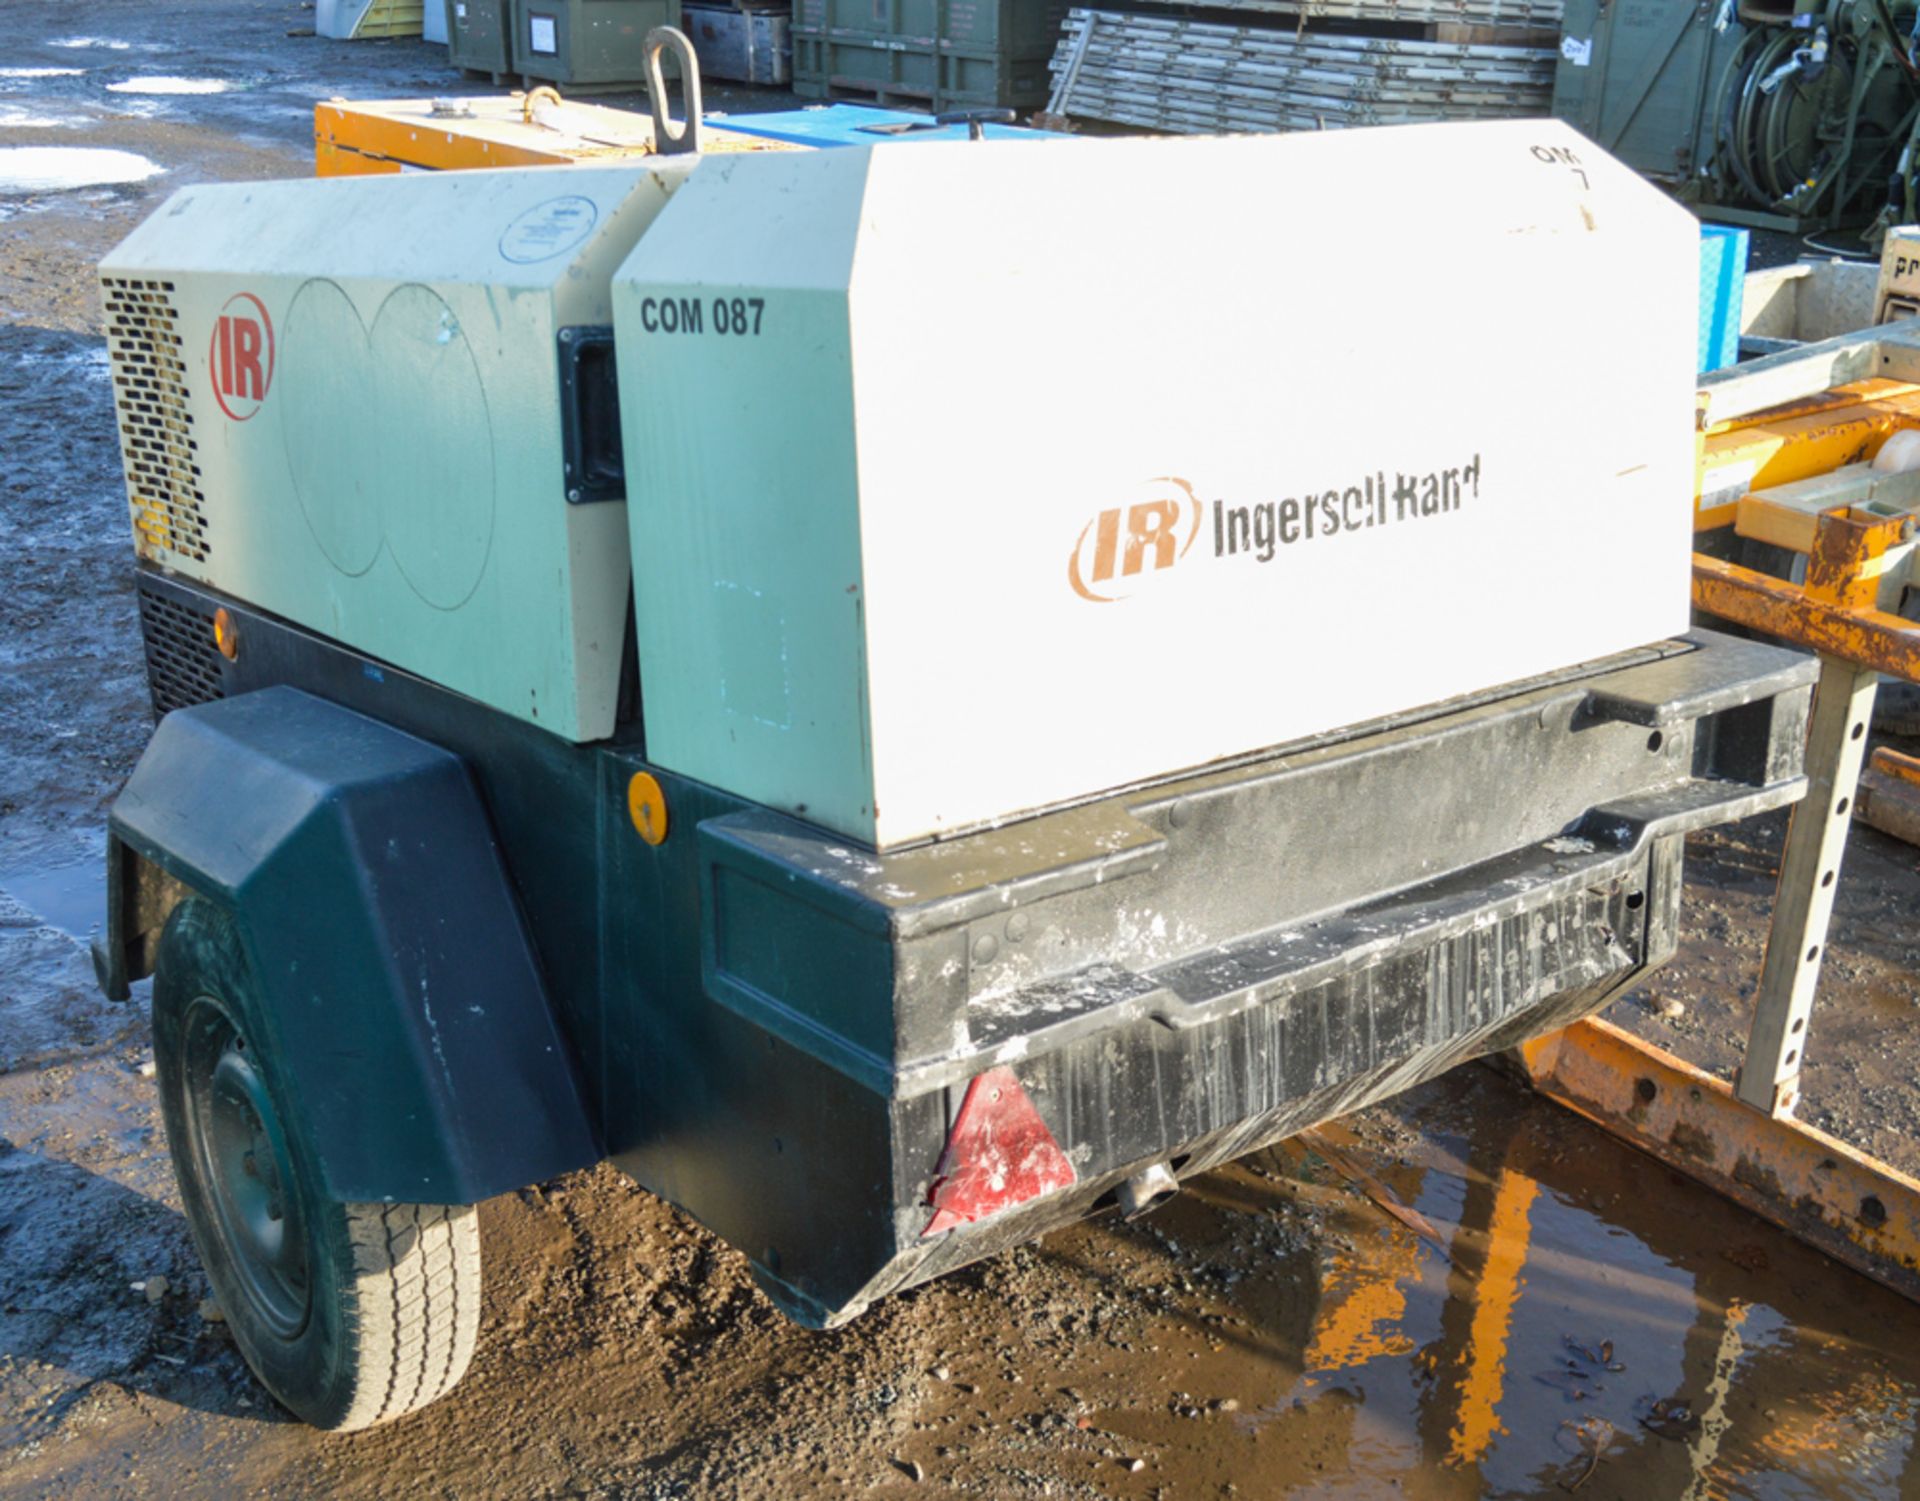 Ingersol Rand 7/31 diesel driven compressor/generator Year: 2005 S/N: 17959 Recorded Hours: 1593 - Image 2 of 4